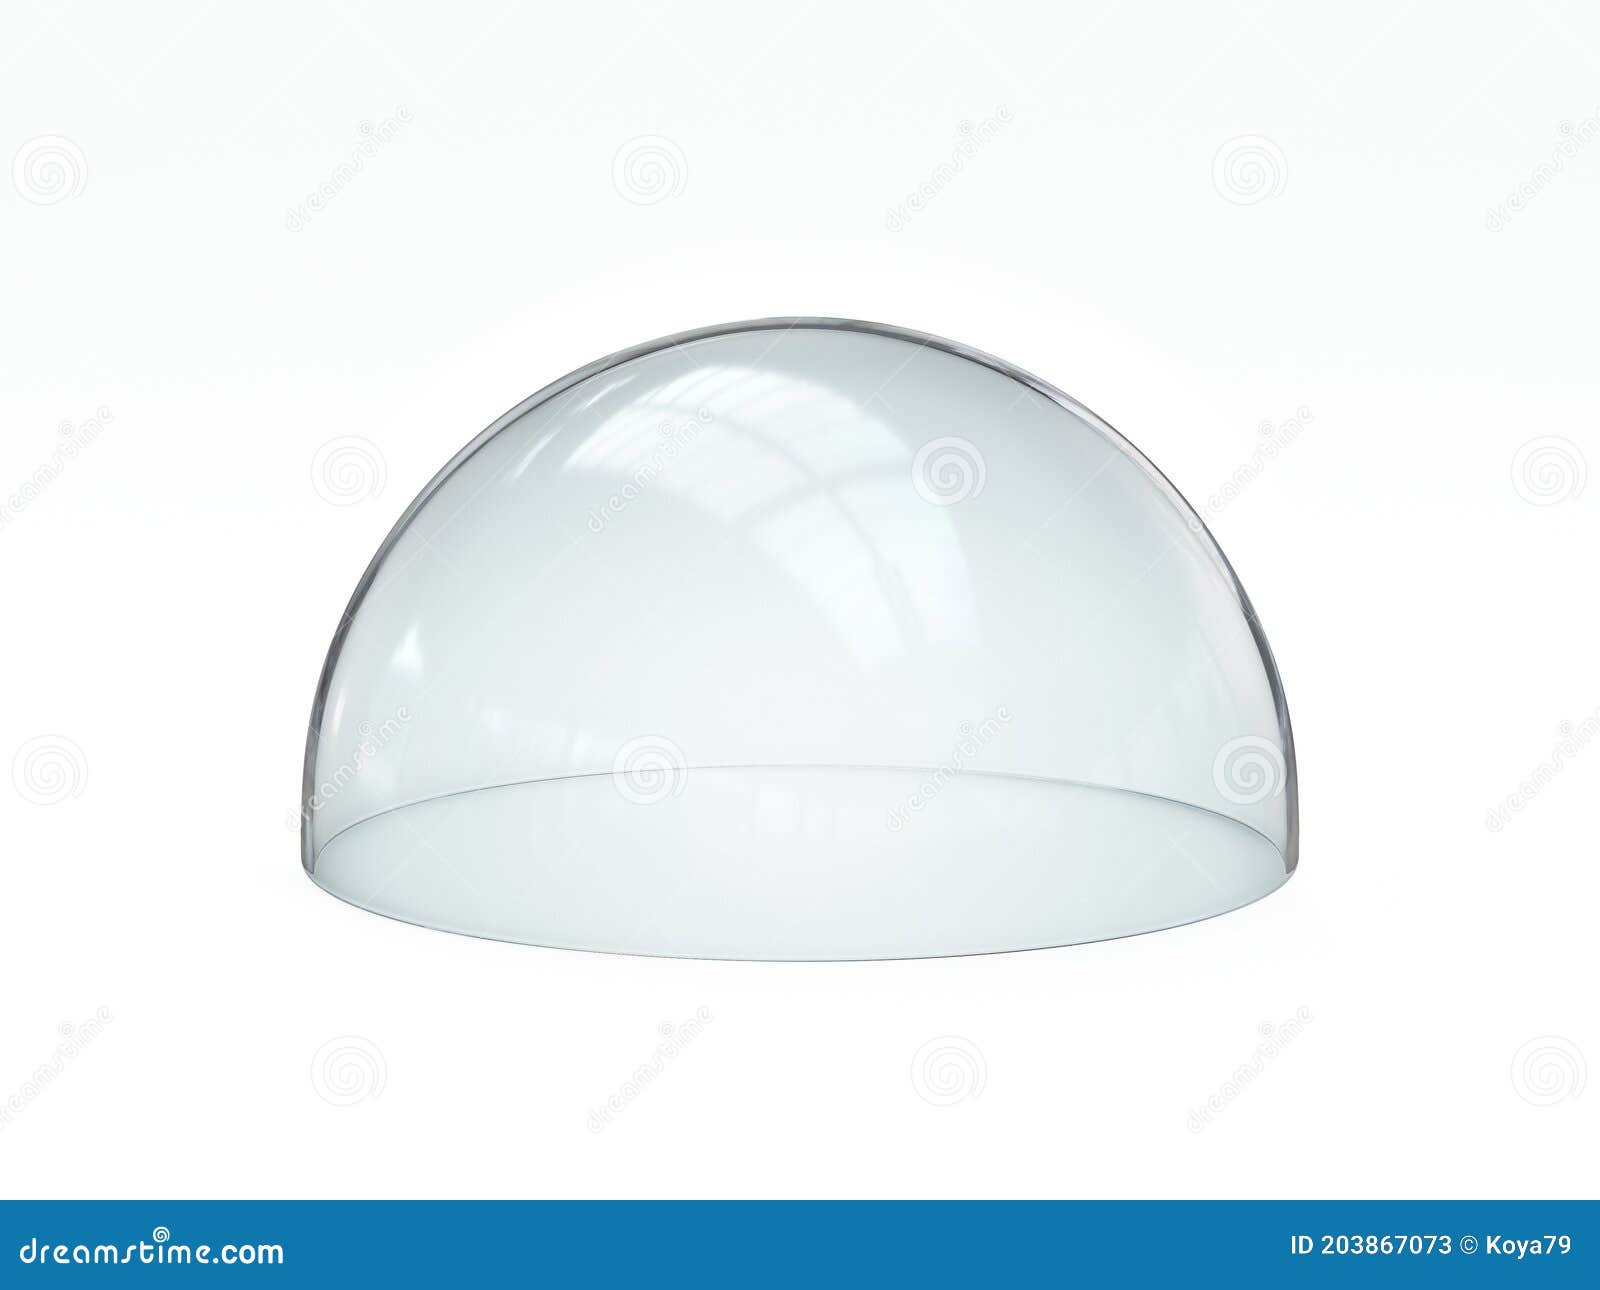 empty glass dome, transparent hemisphere cover 3d rendering